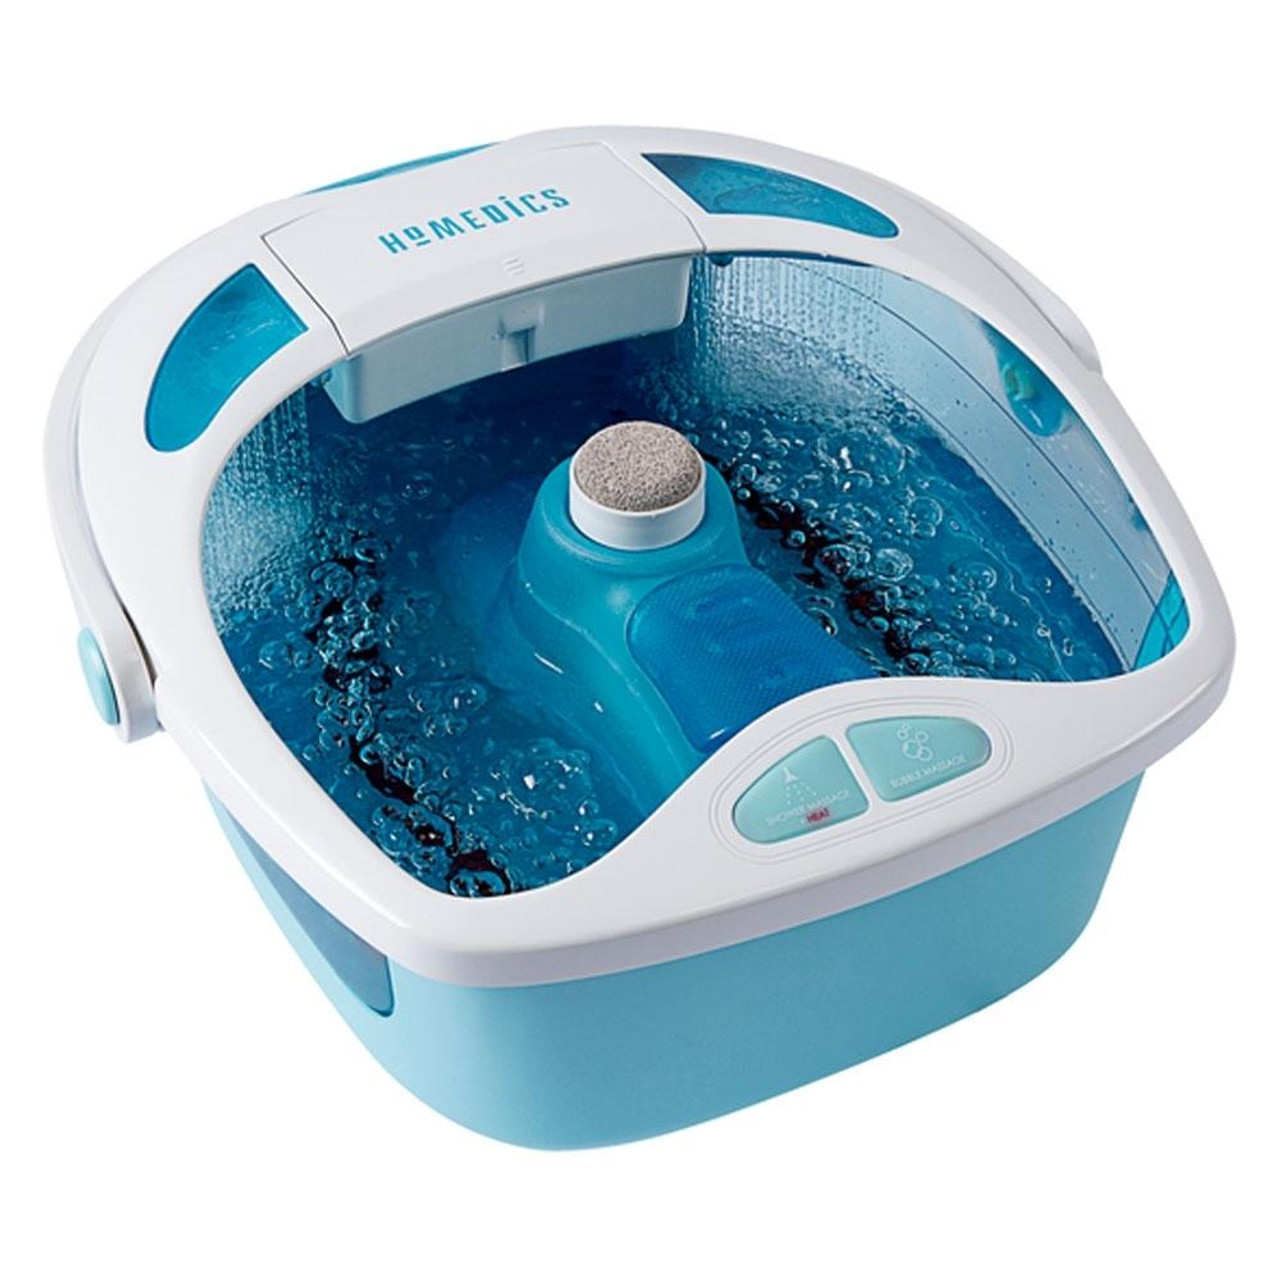 Gadgets to add that home spa touch